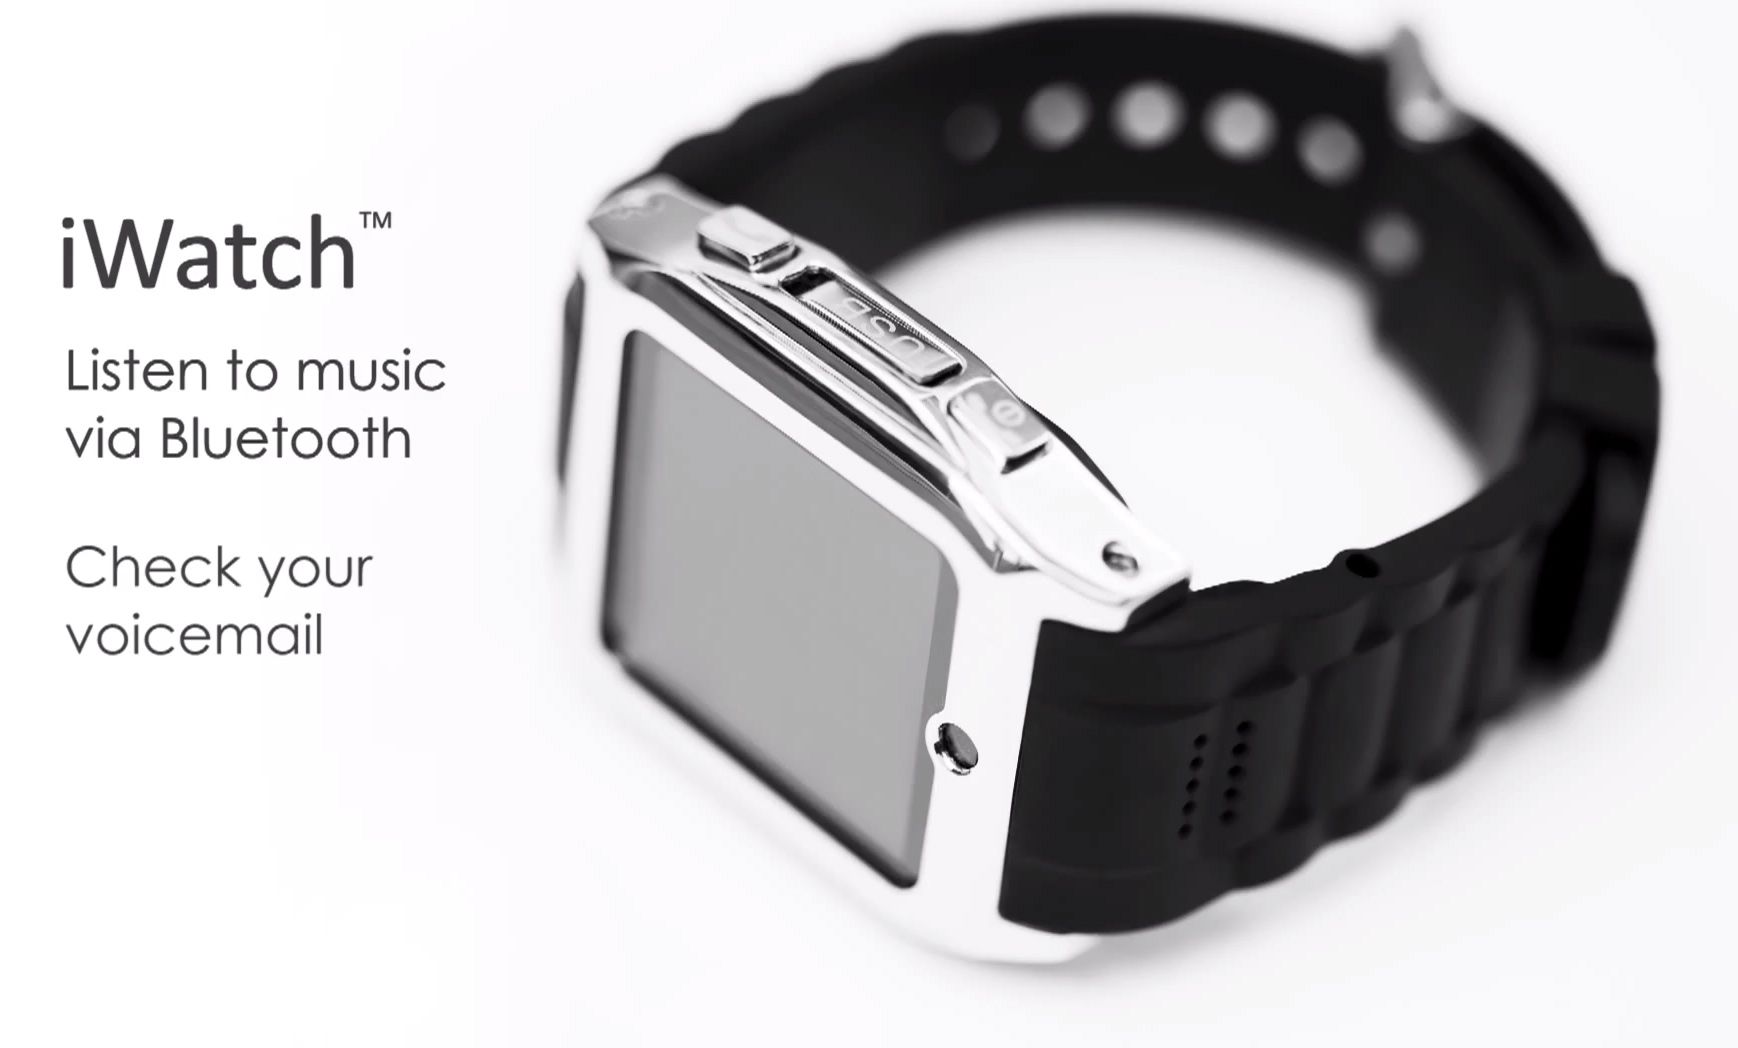 apple iwatch hits snag name already trademarked in us uk and china image 2